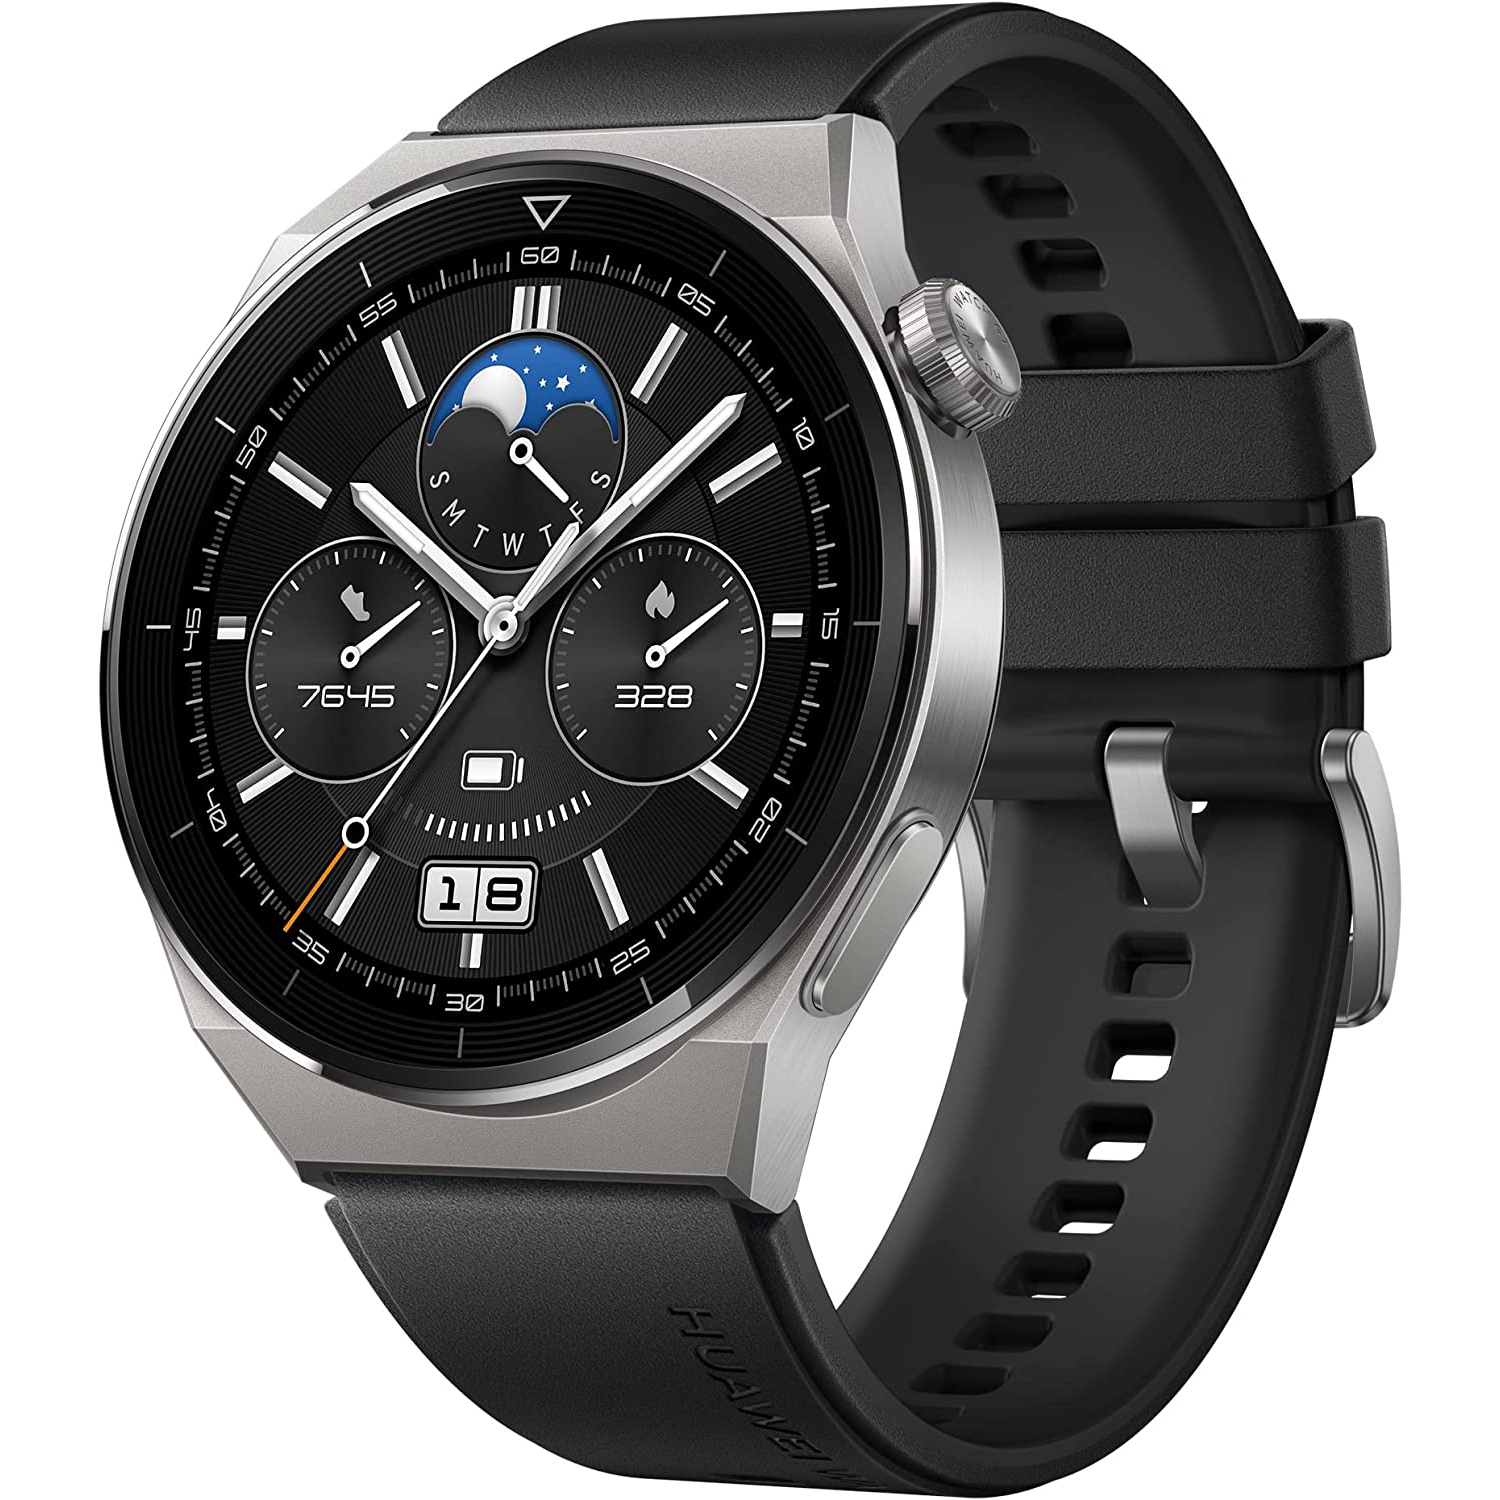 HUAWEI WATCH GT 3 Pro Active 46mm Smartwatch - All-Day Fitness Tracker and Health Monitoring - Durable Battery - Sapphire Watch Dial - Bluetooth Calling - Black